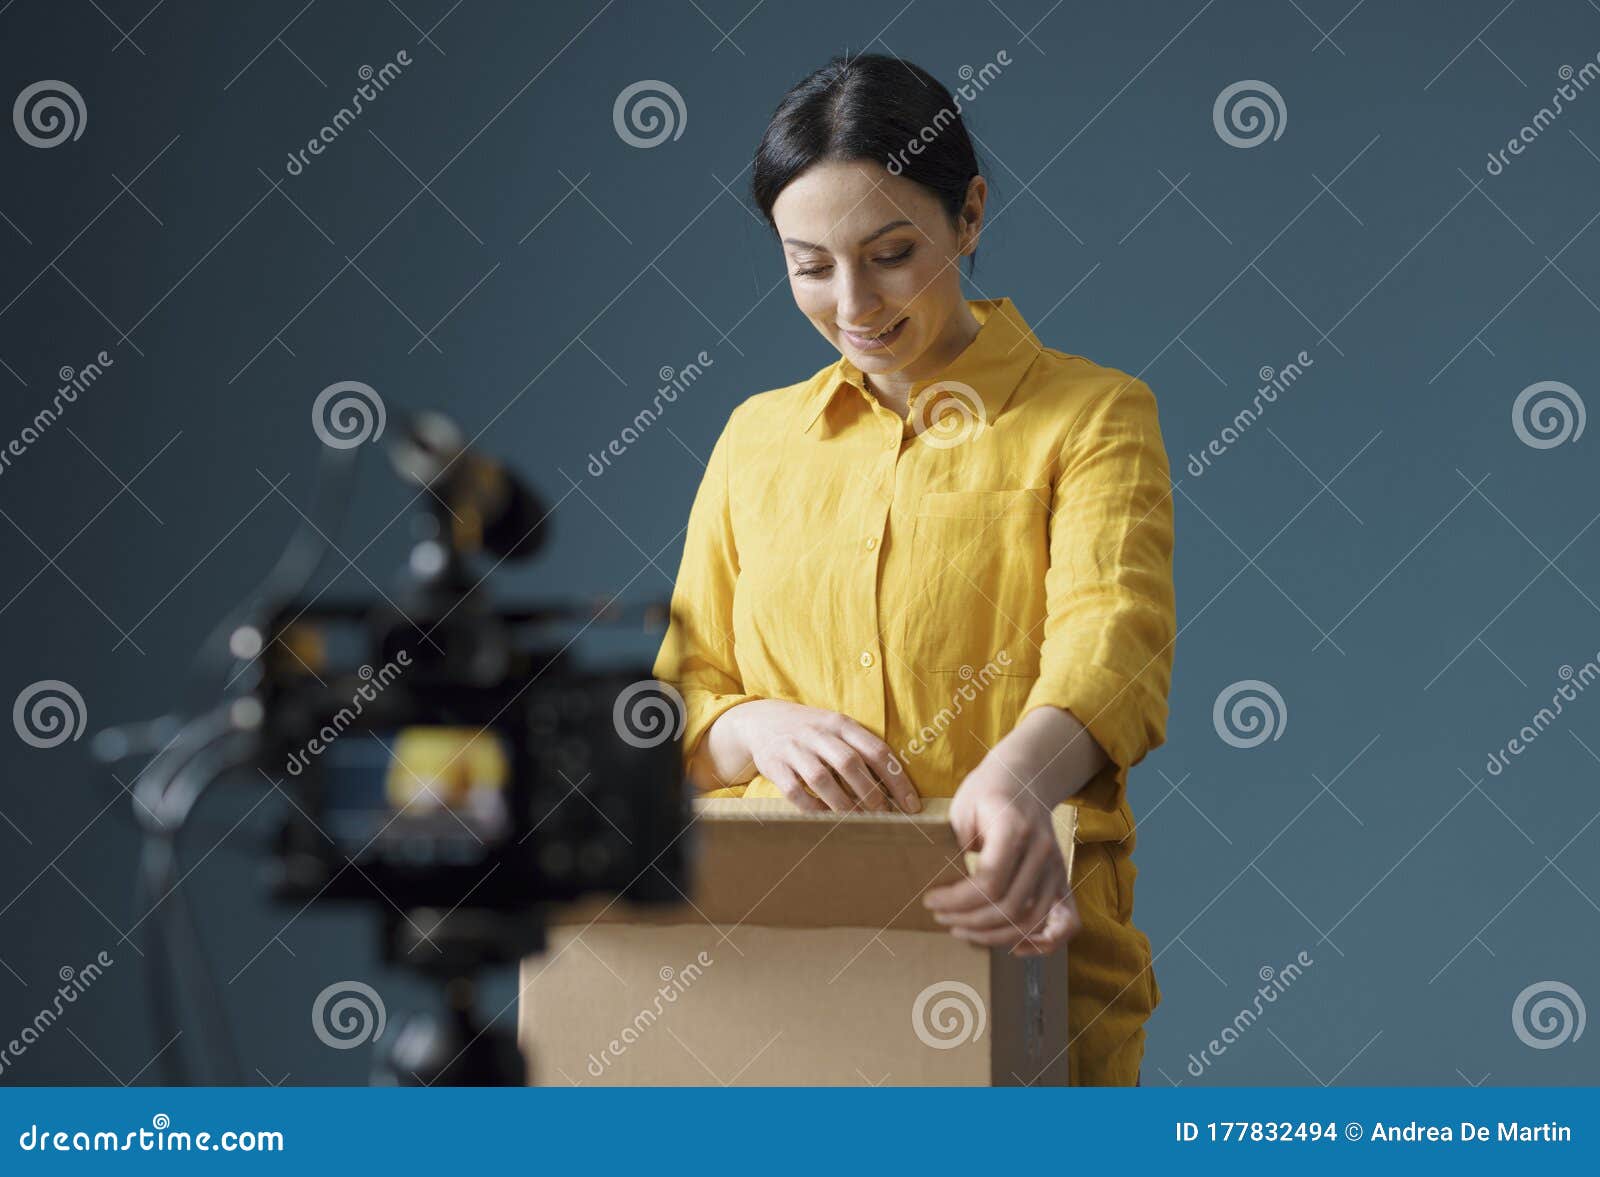 vlogger making an unboxing video for her channel